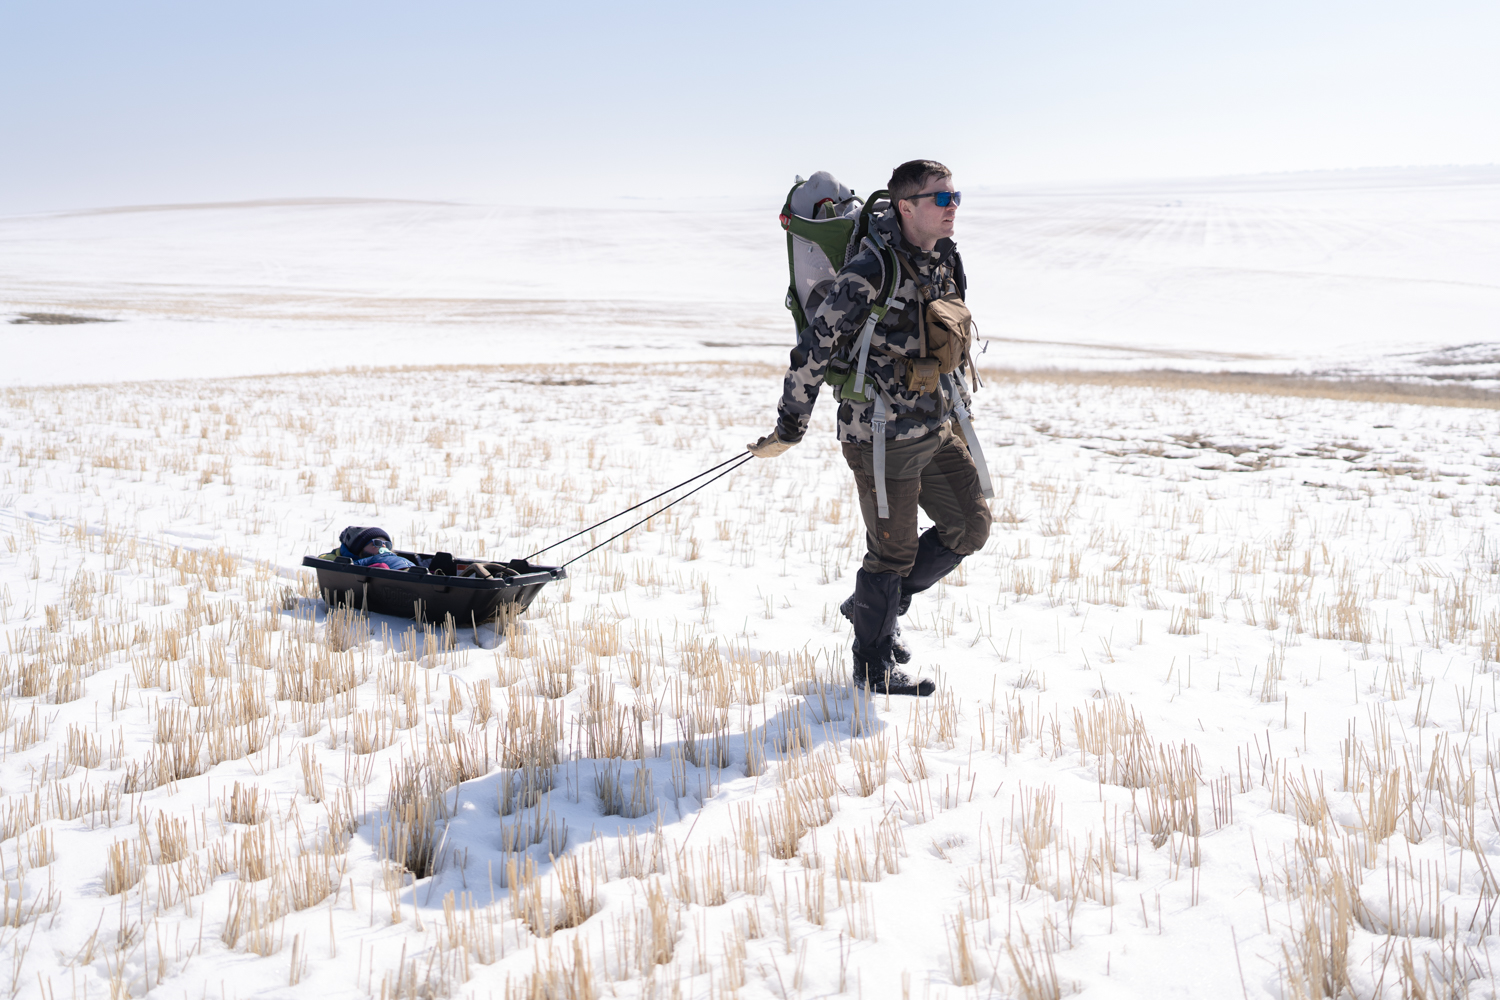 dad wearing camo pulls sleeping toddler in a black sled along snowy ground in a field 